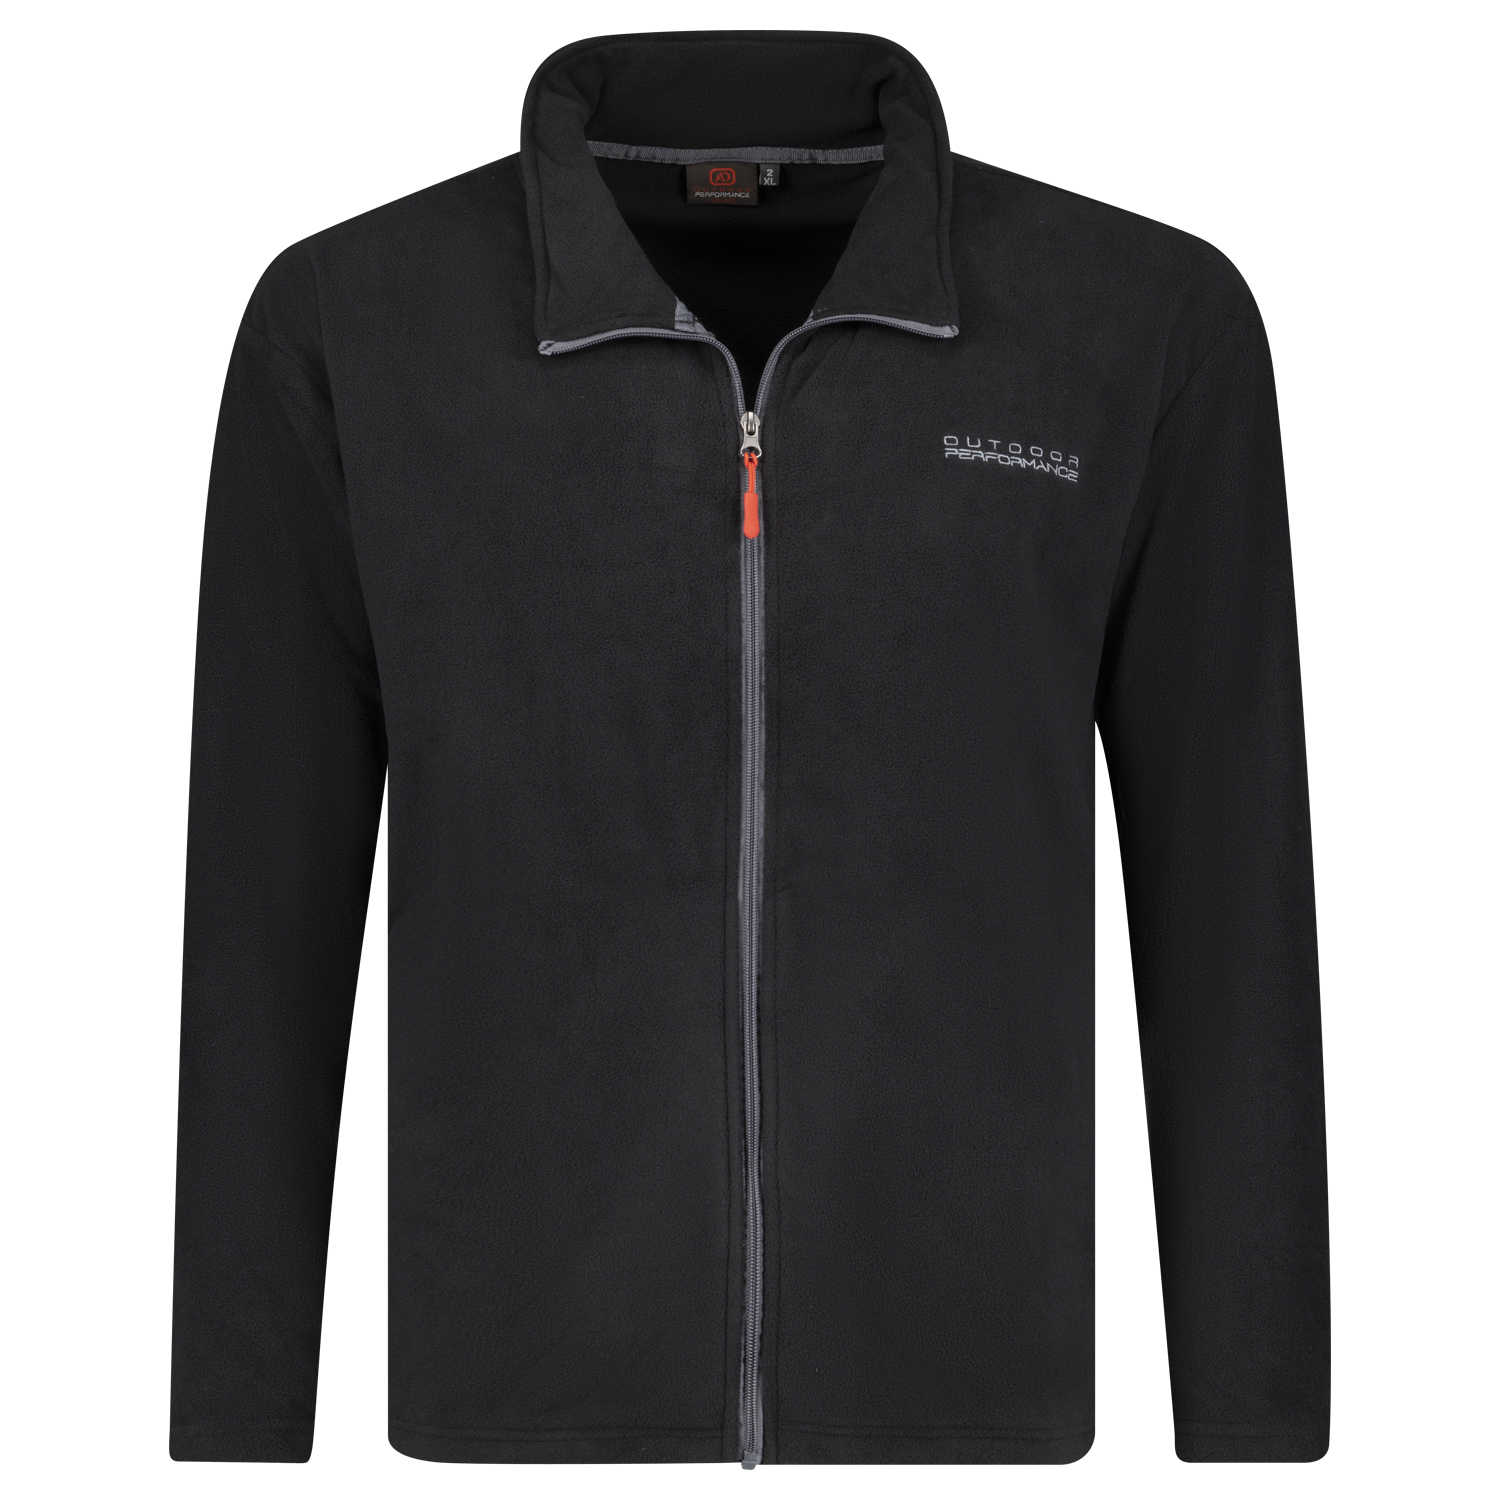 Fleece jacket in black Series Tampa by Adamo Tall Fit extra long in long sizes up to 5XLT